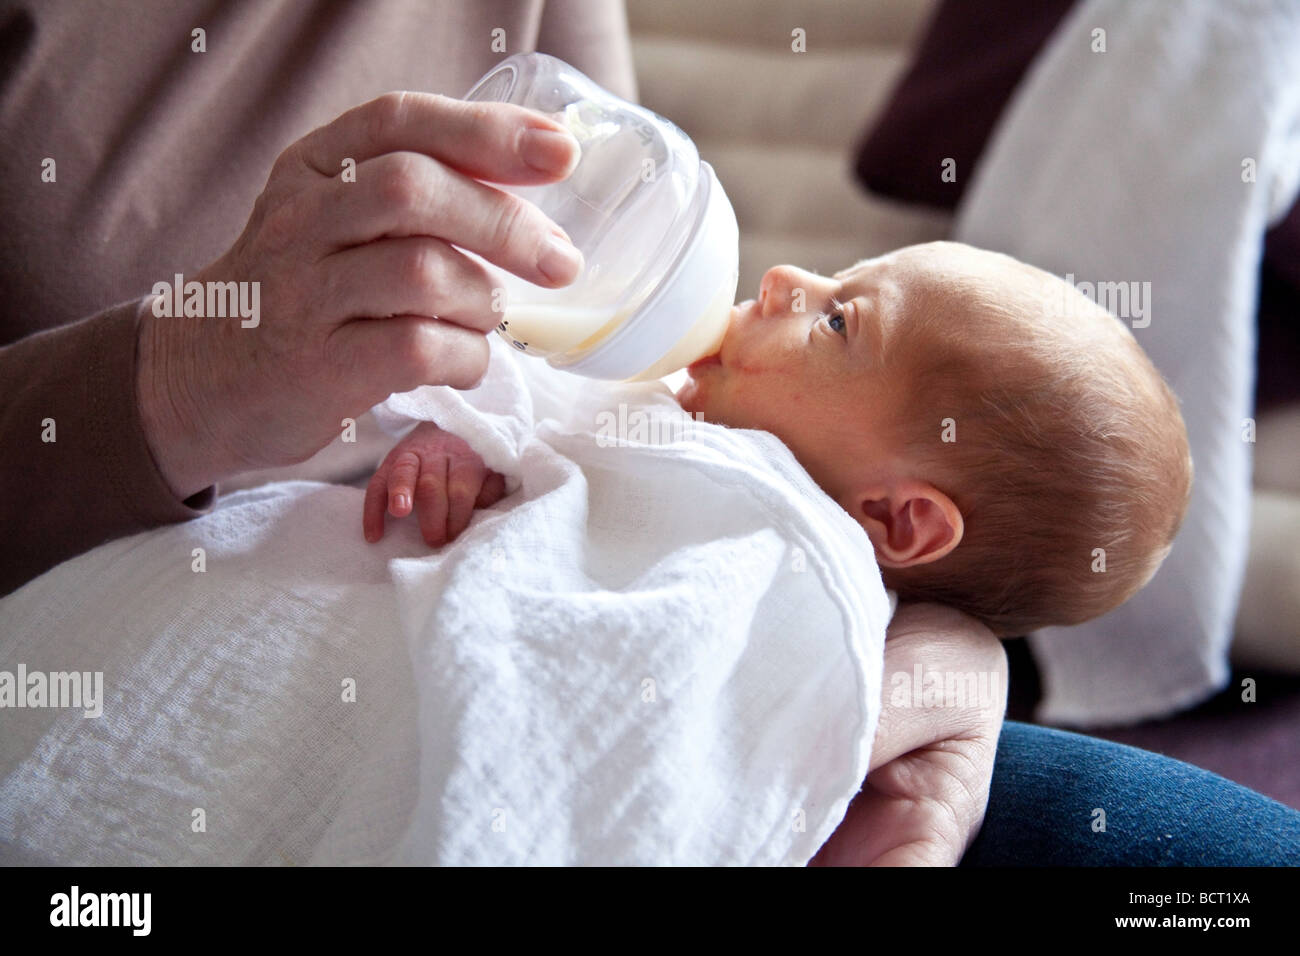 A newborn baby boy (7 days old) being bottle fed, London, England. Stock Photo